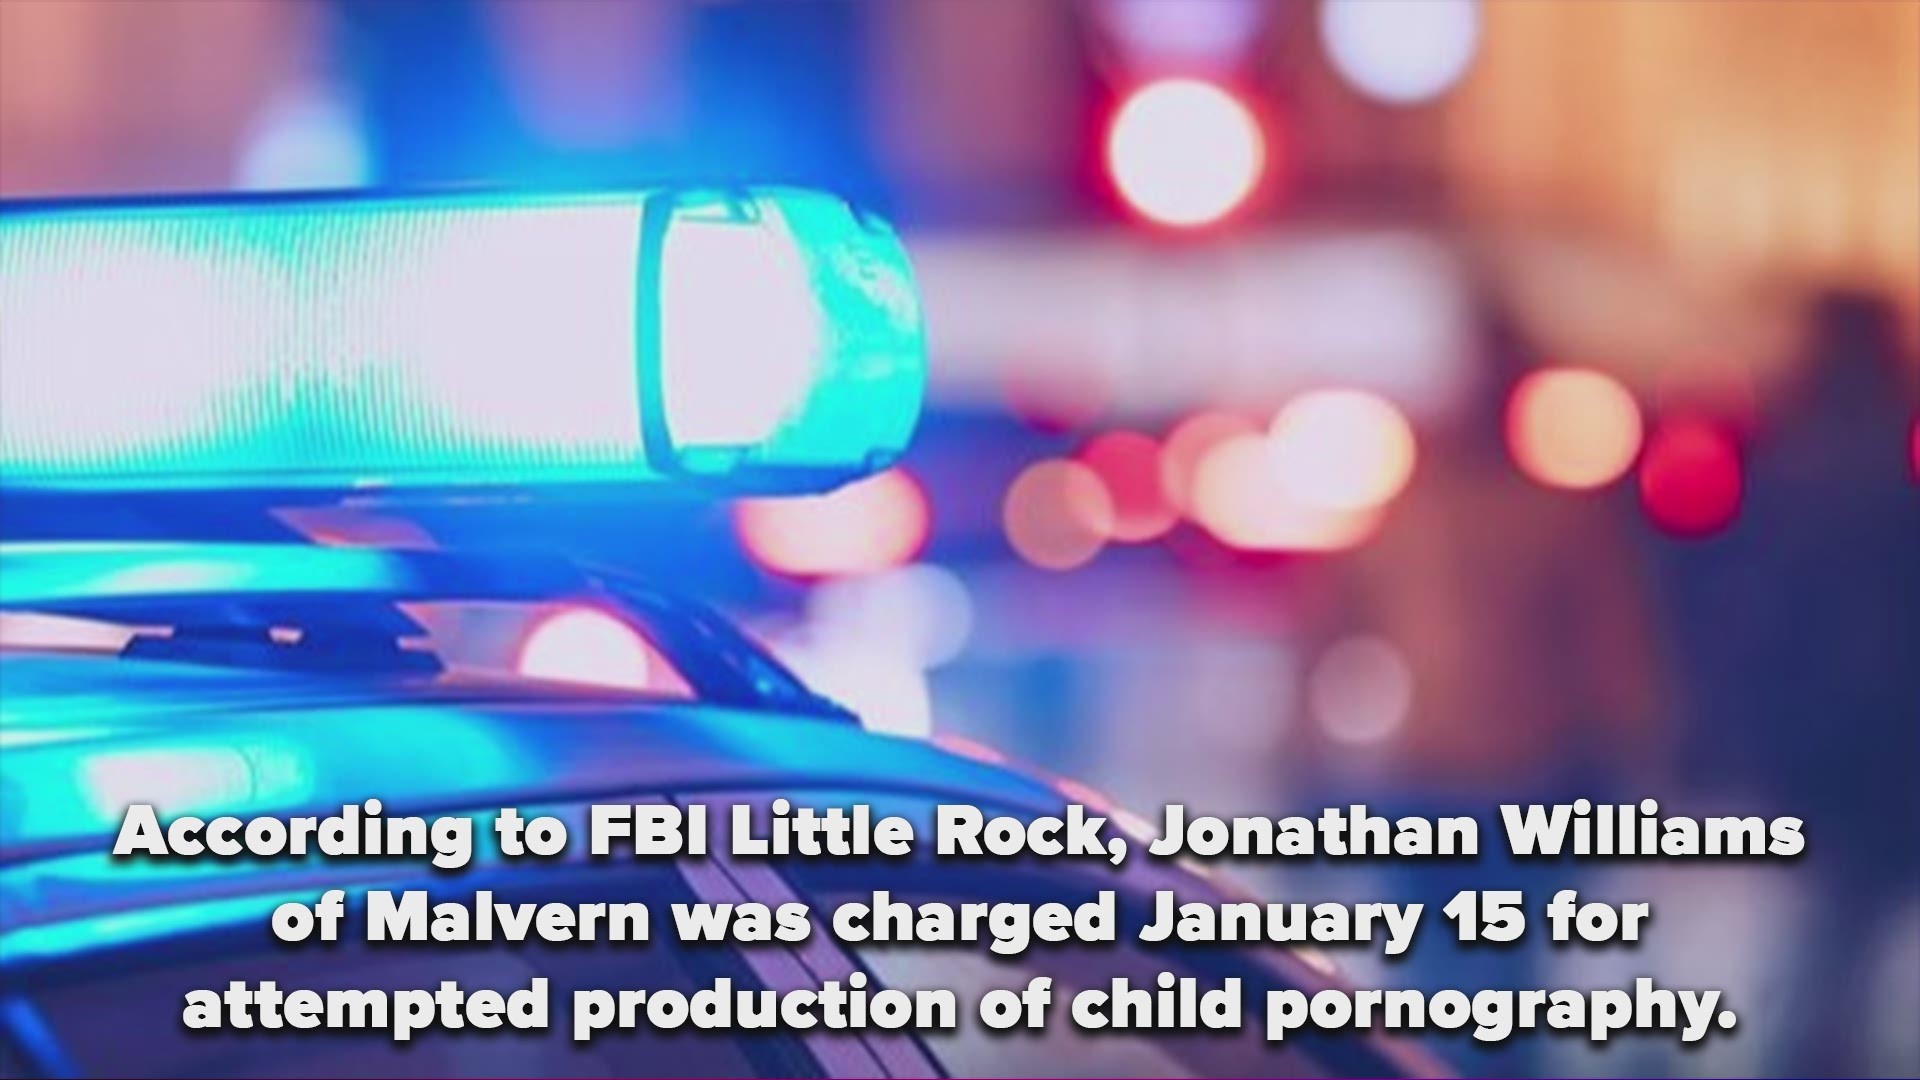 Jonathan Williams was arrested for the attempted production of child pornography.